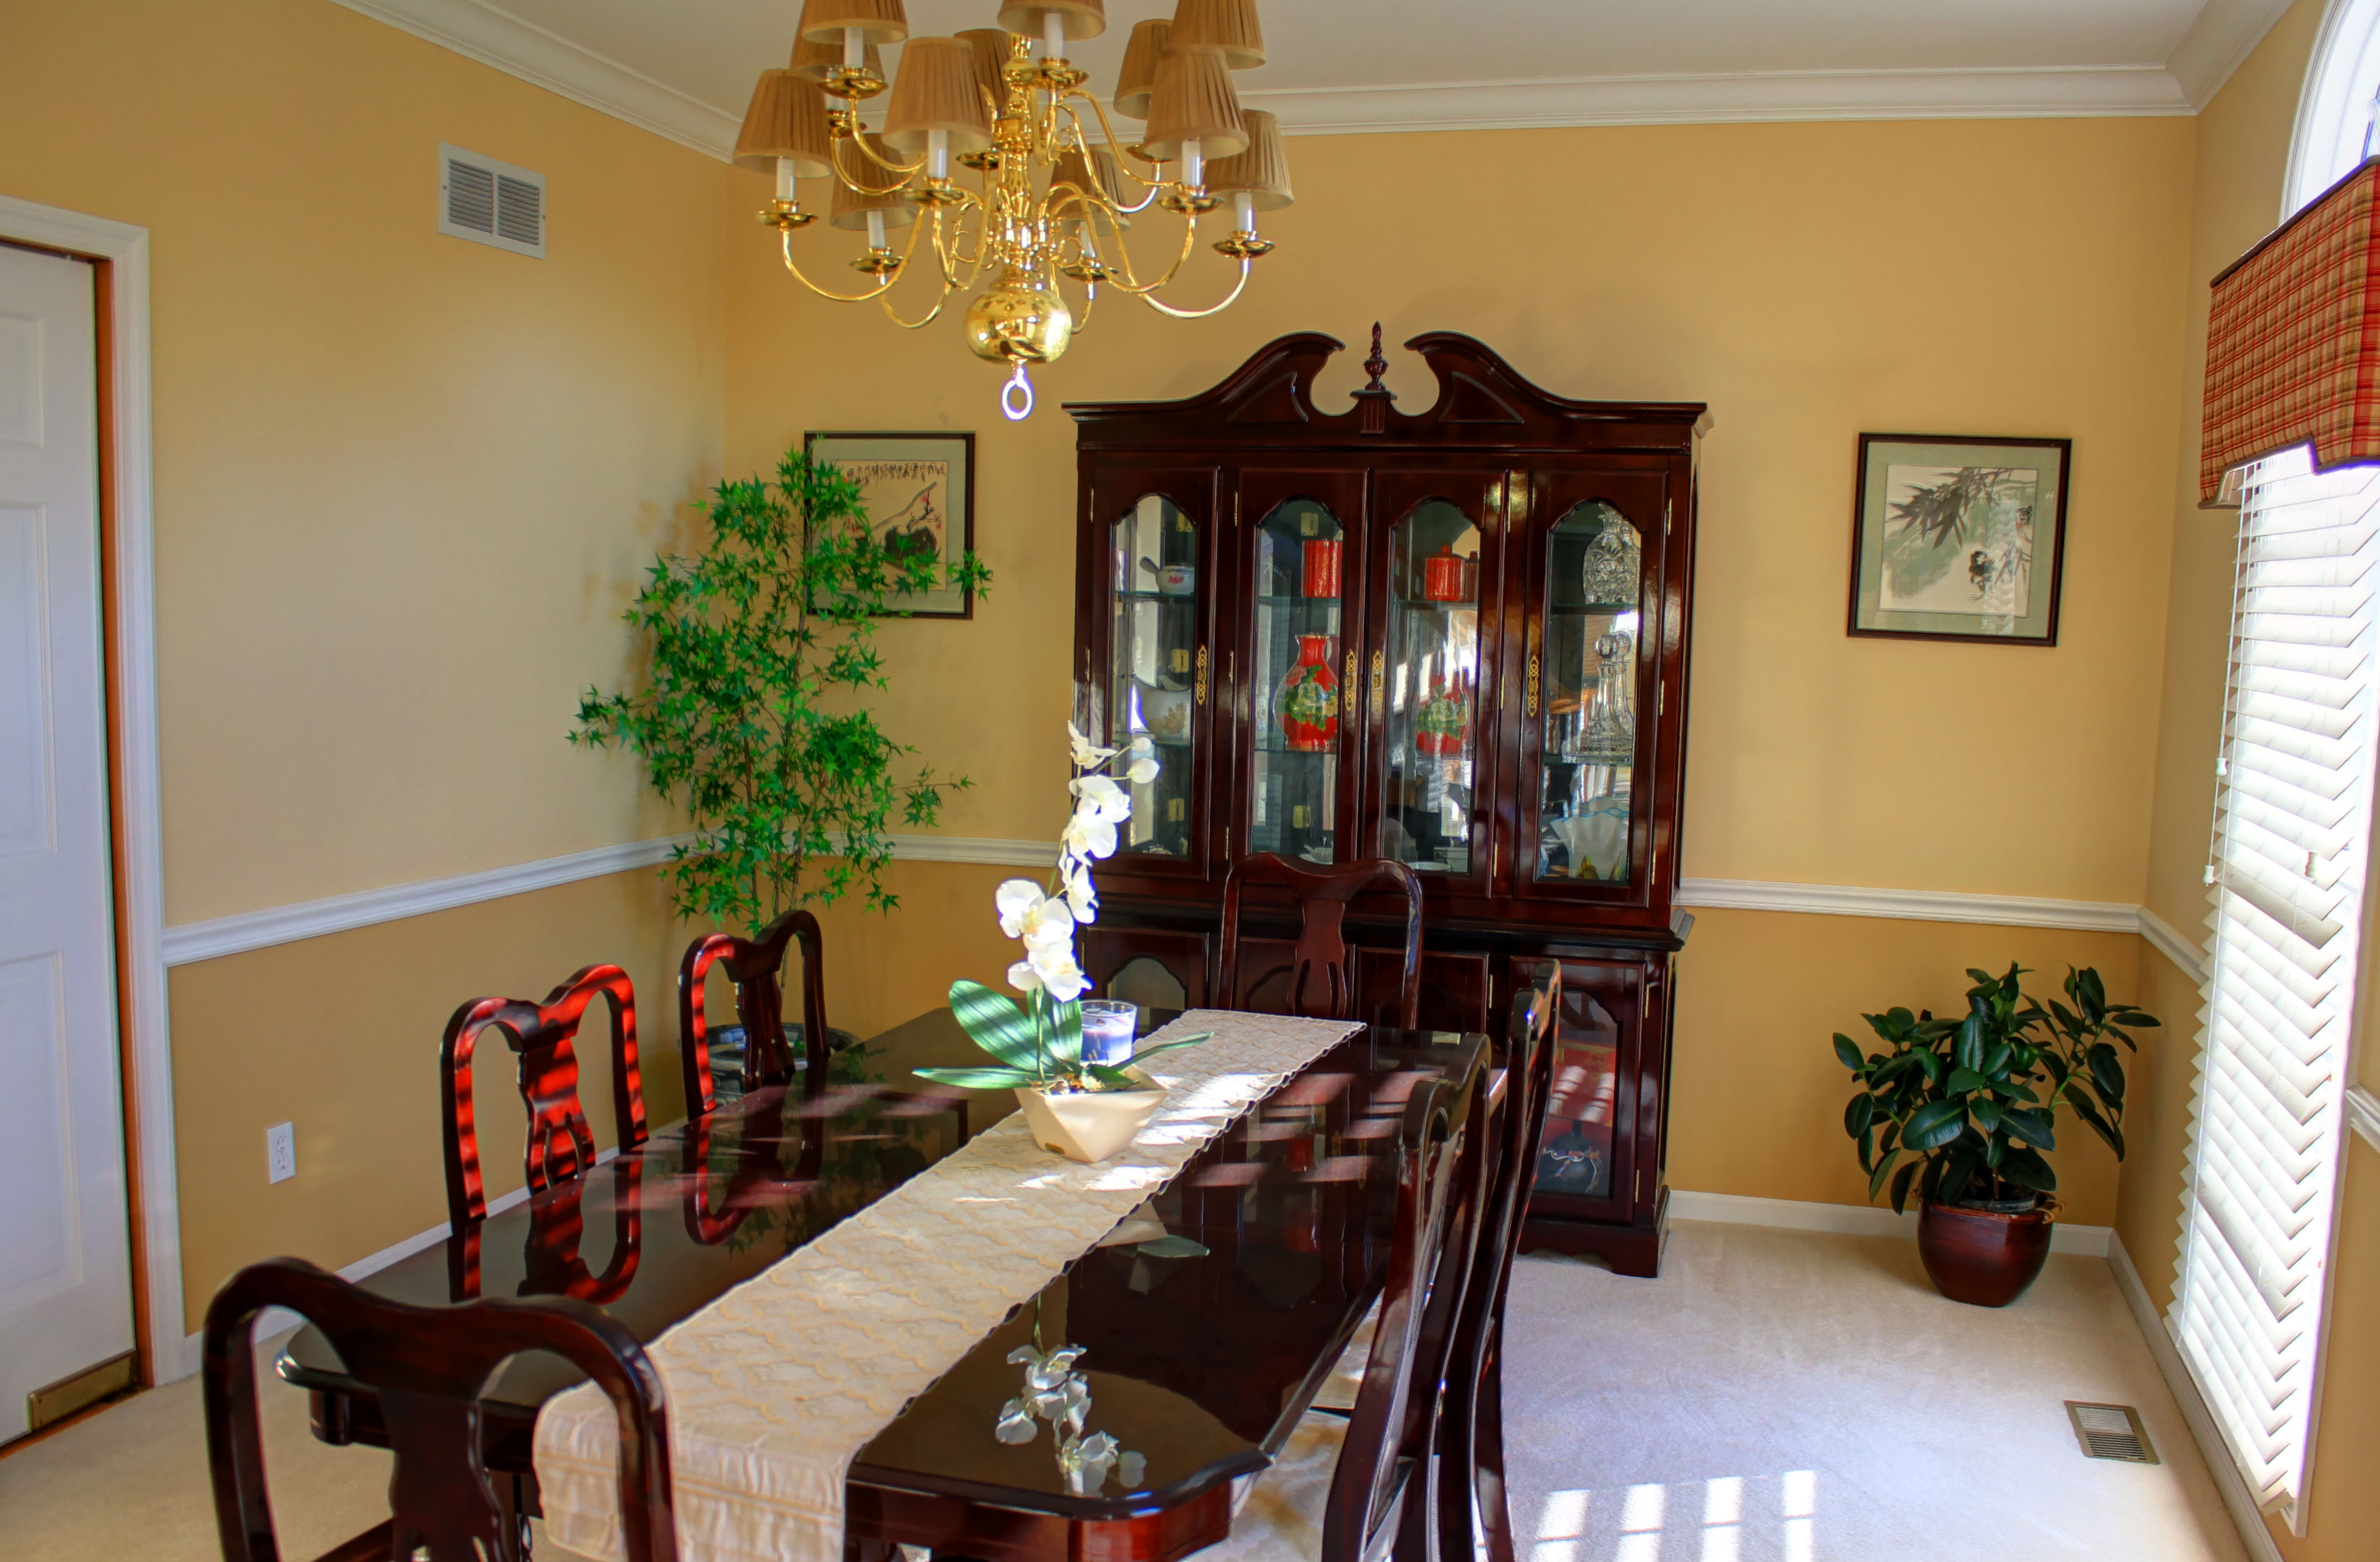 dining room images free download